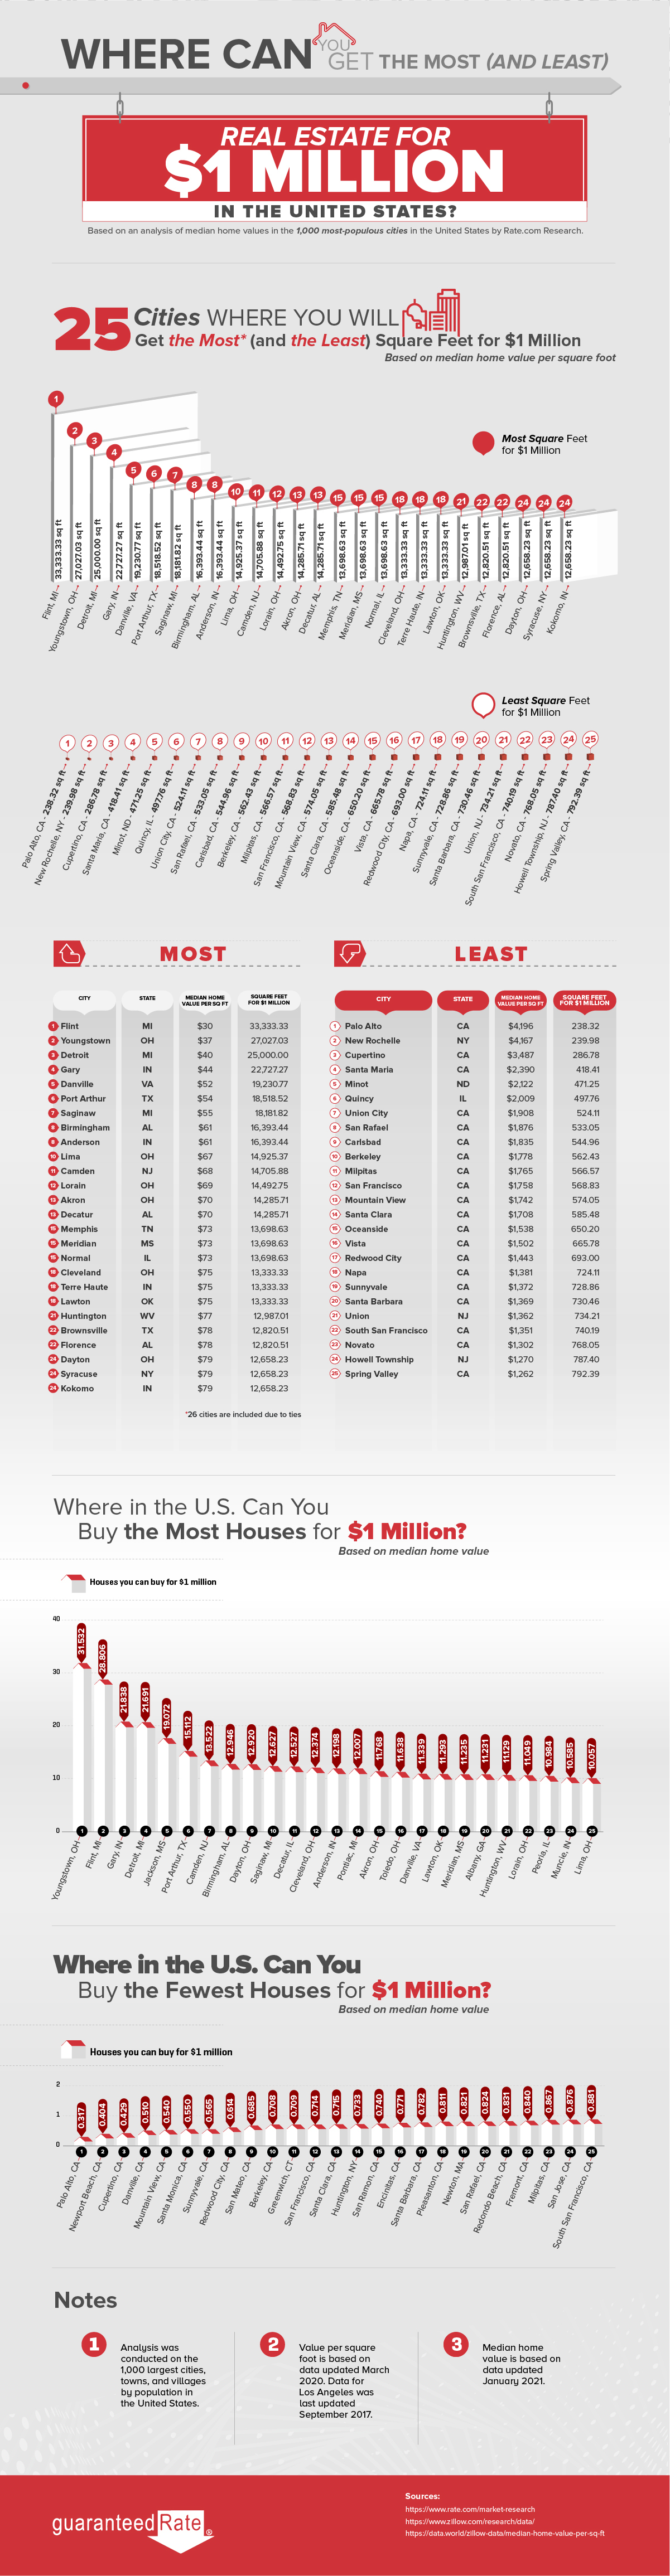 Where Can You Buy the Most Real Estate for $1M?